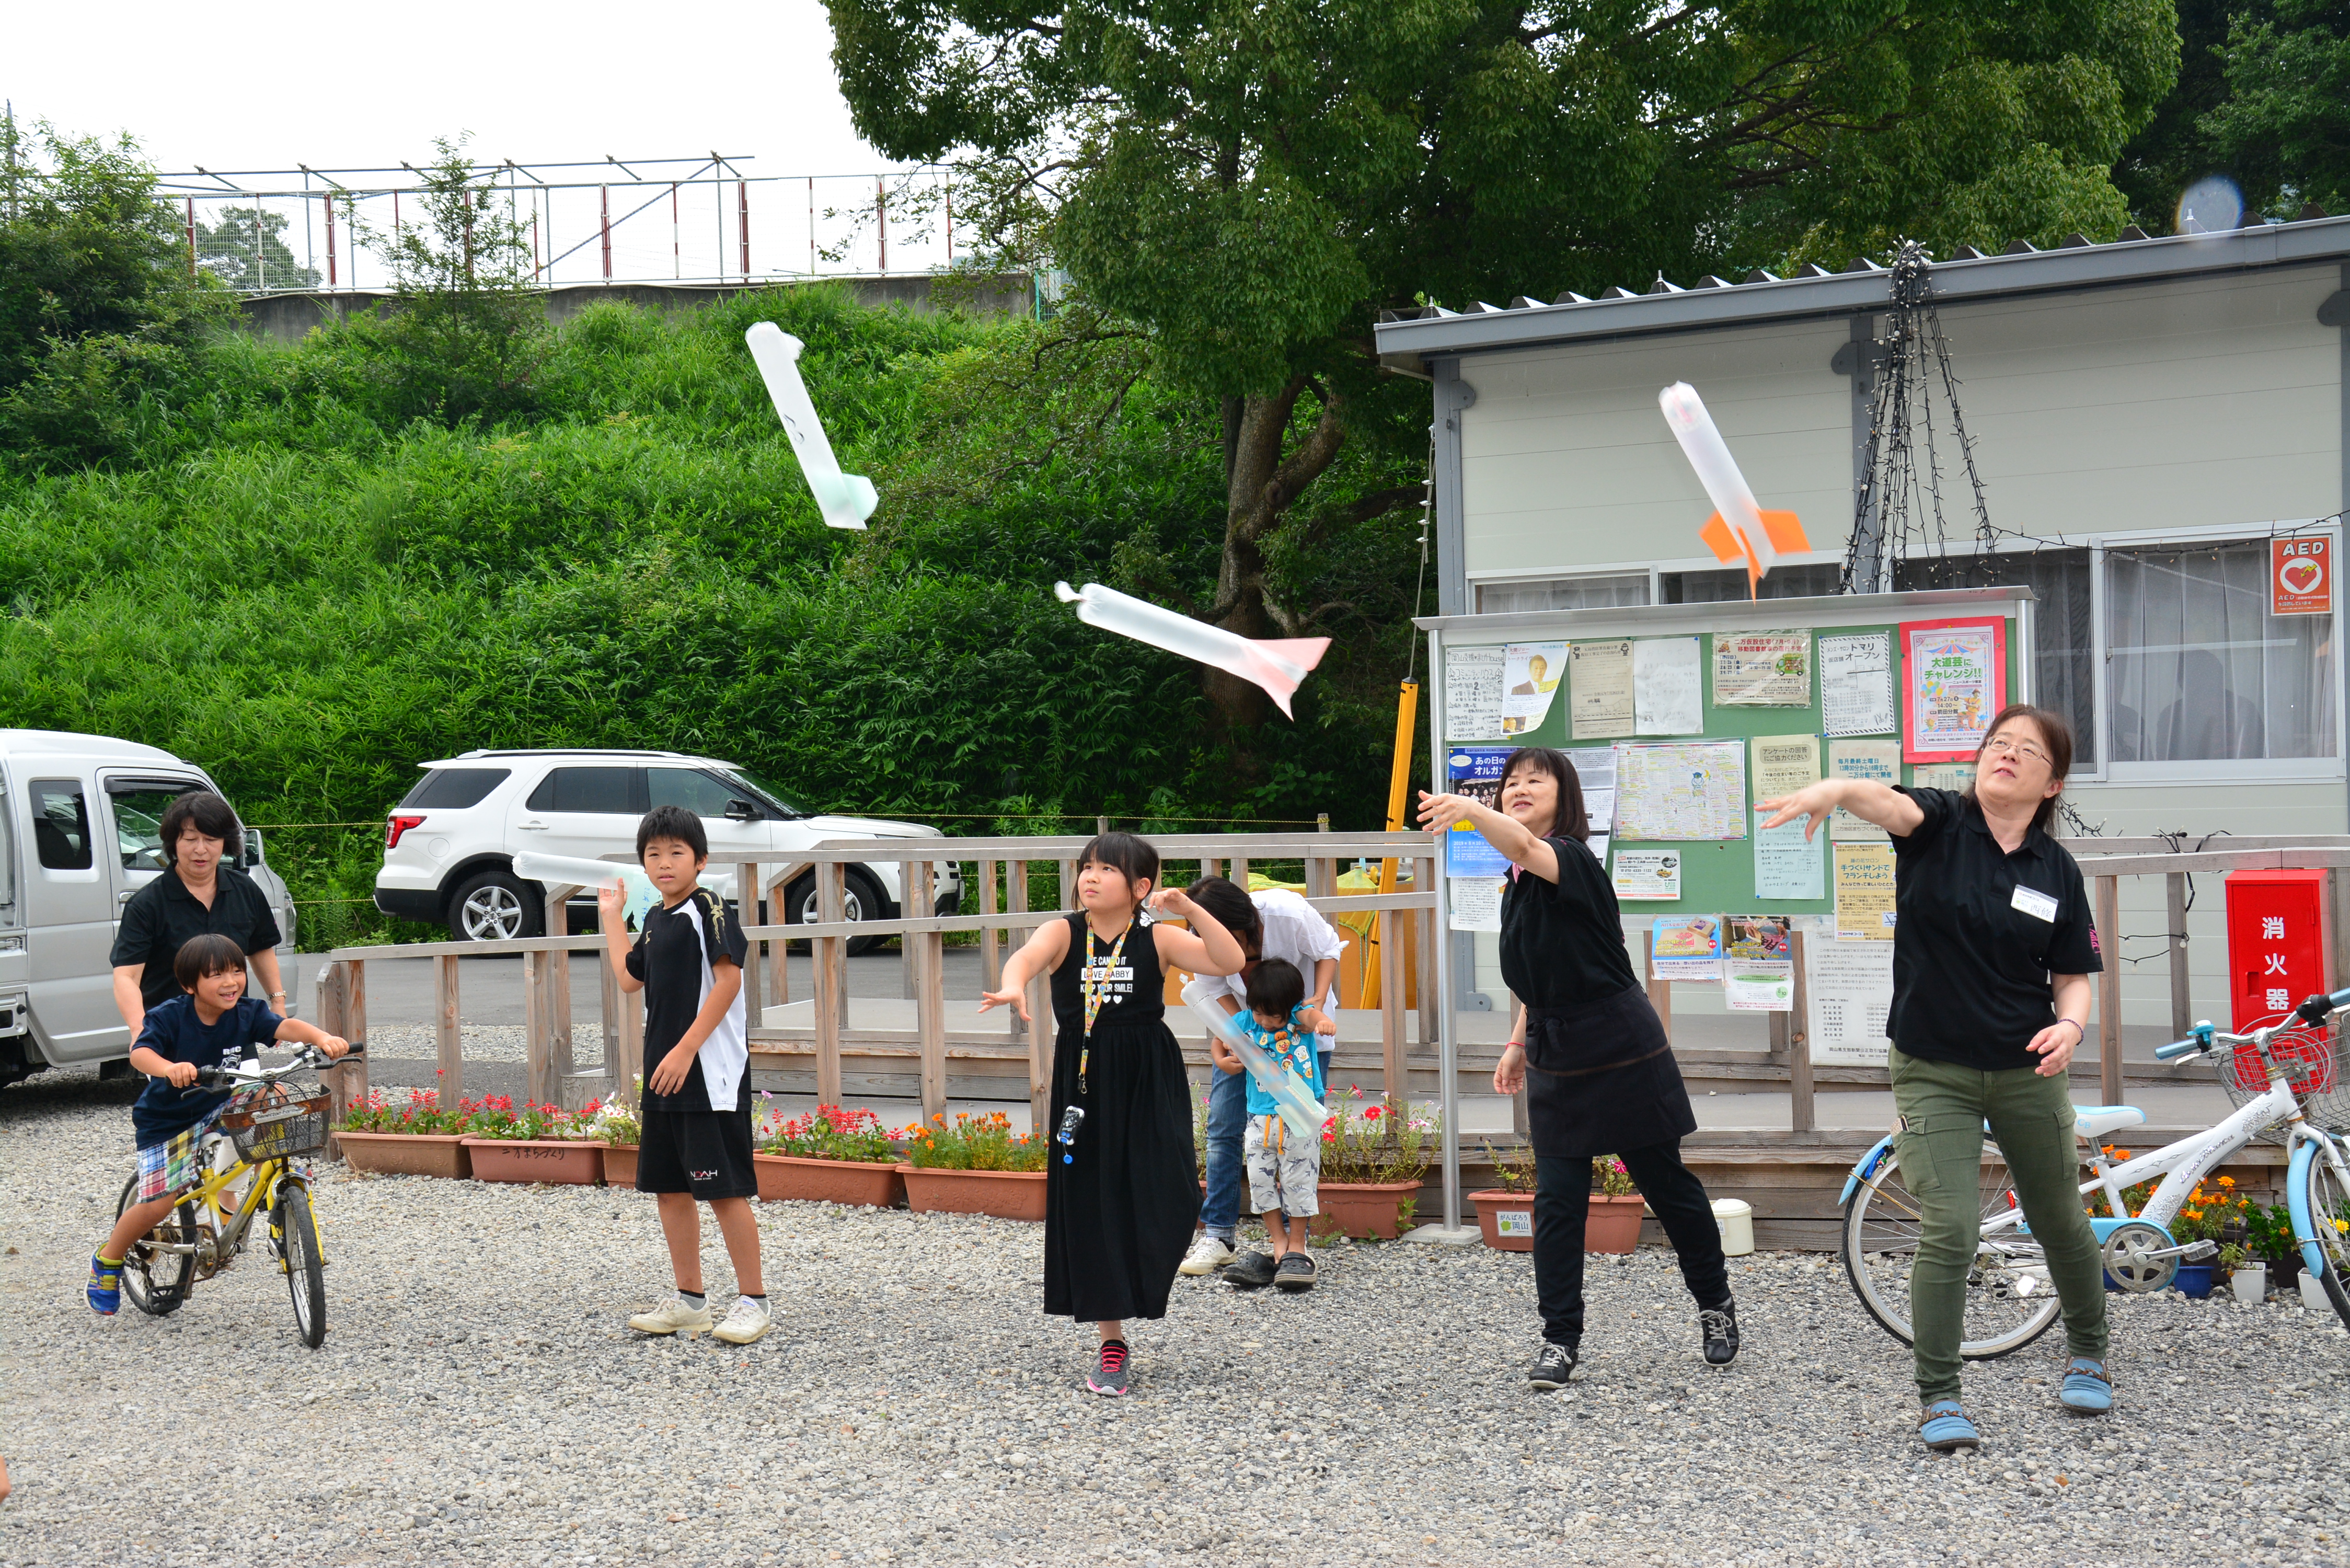 Okayama Co-op's children event for heavy rain victims living in temporary housing